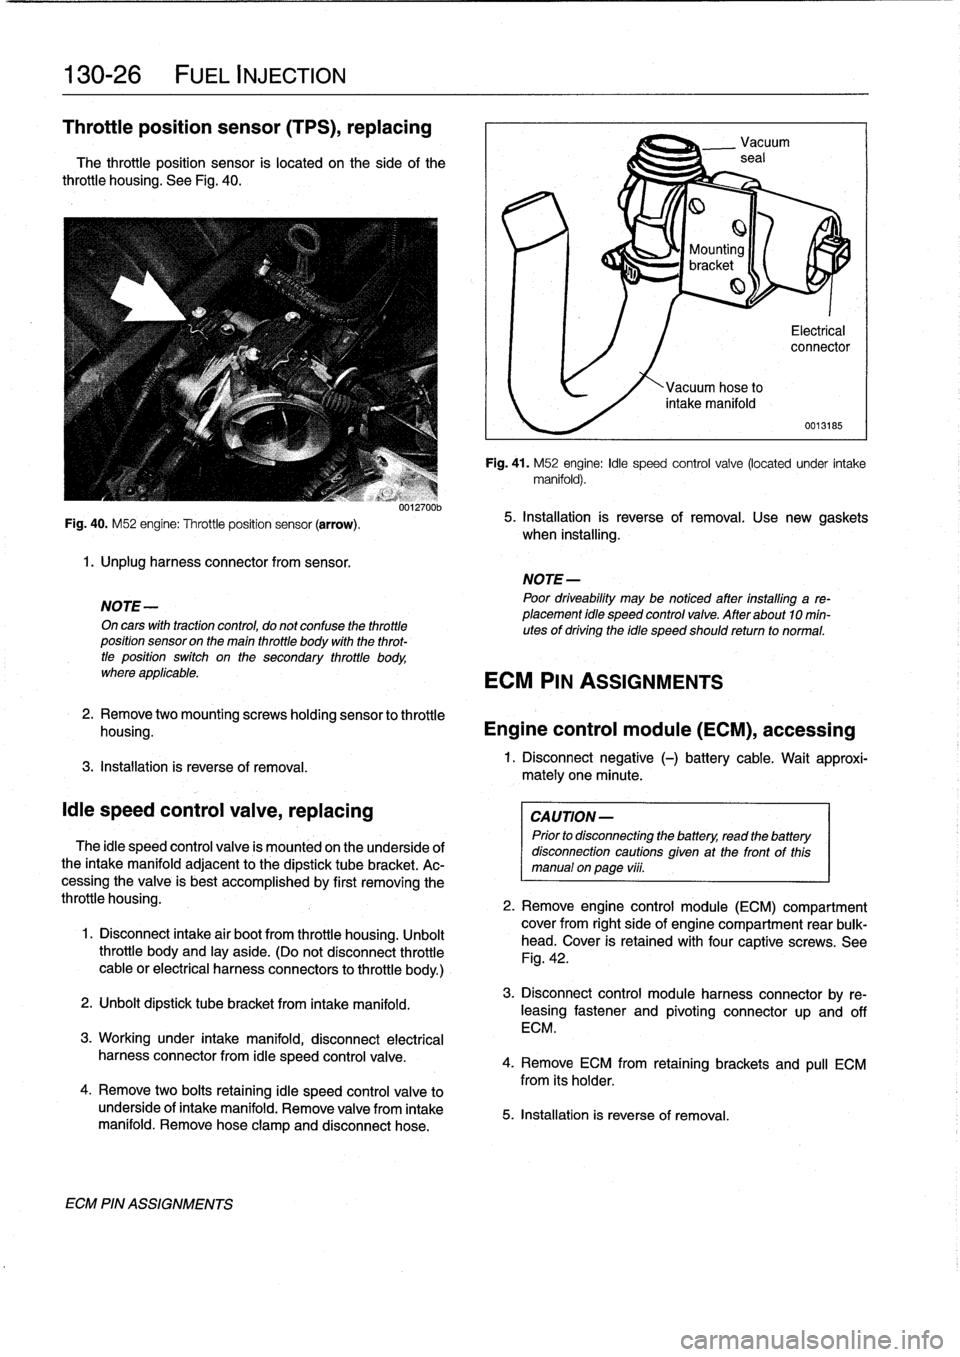 BMW 318i 1995 E36 Workshop Manual 
130-26

	

FUEL
INJECTION

Throttle
position
sensor
(TPS),
replacing

The
throttie
position
sensor
is
located
on
the
side
of
the
throttie
housing
.
See
Fig
.
40
.

Fig
.
40
.
M52
engine
:
Throttle
po